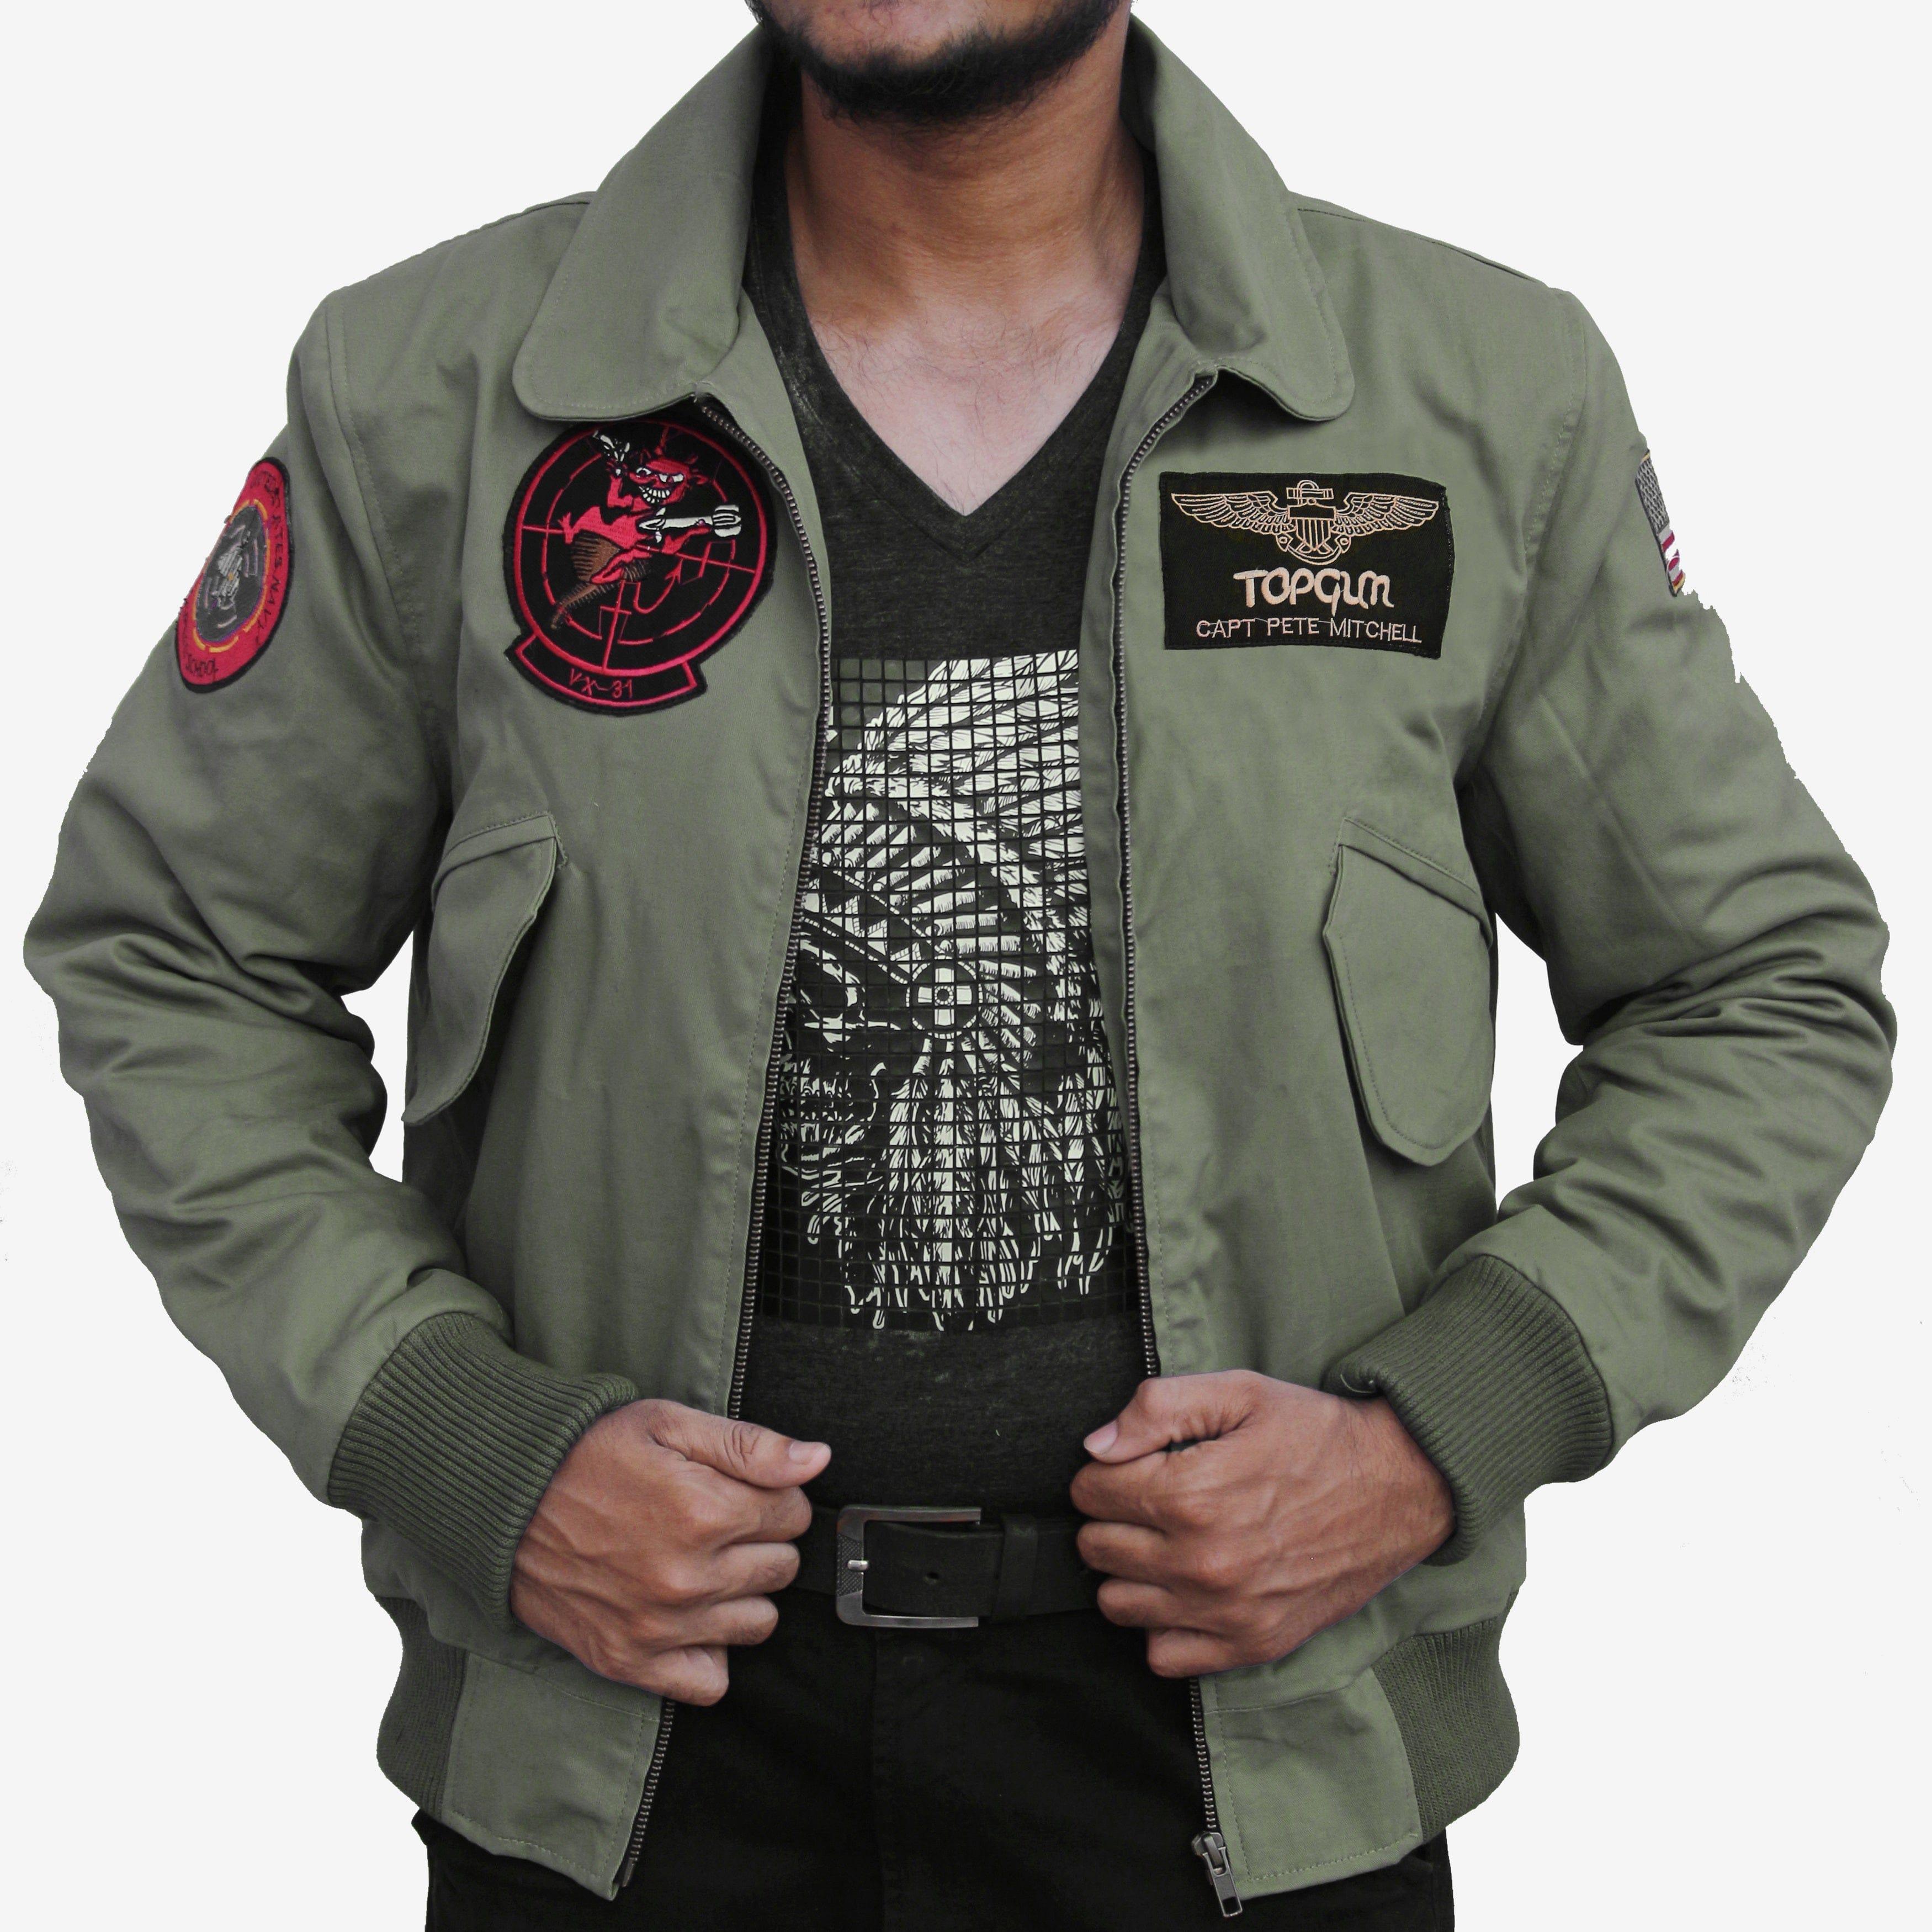 Maverick Tom Cruise Top Gun Leather Jacket with Patches - Jackets